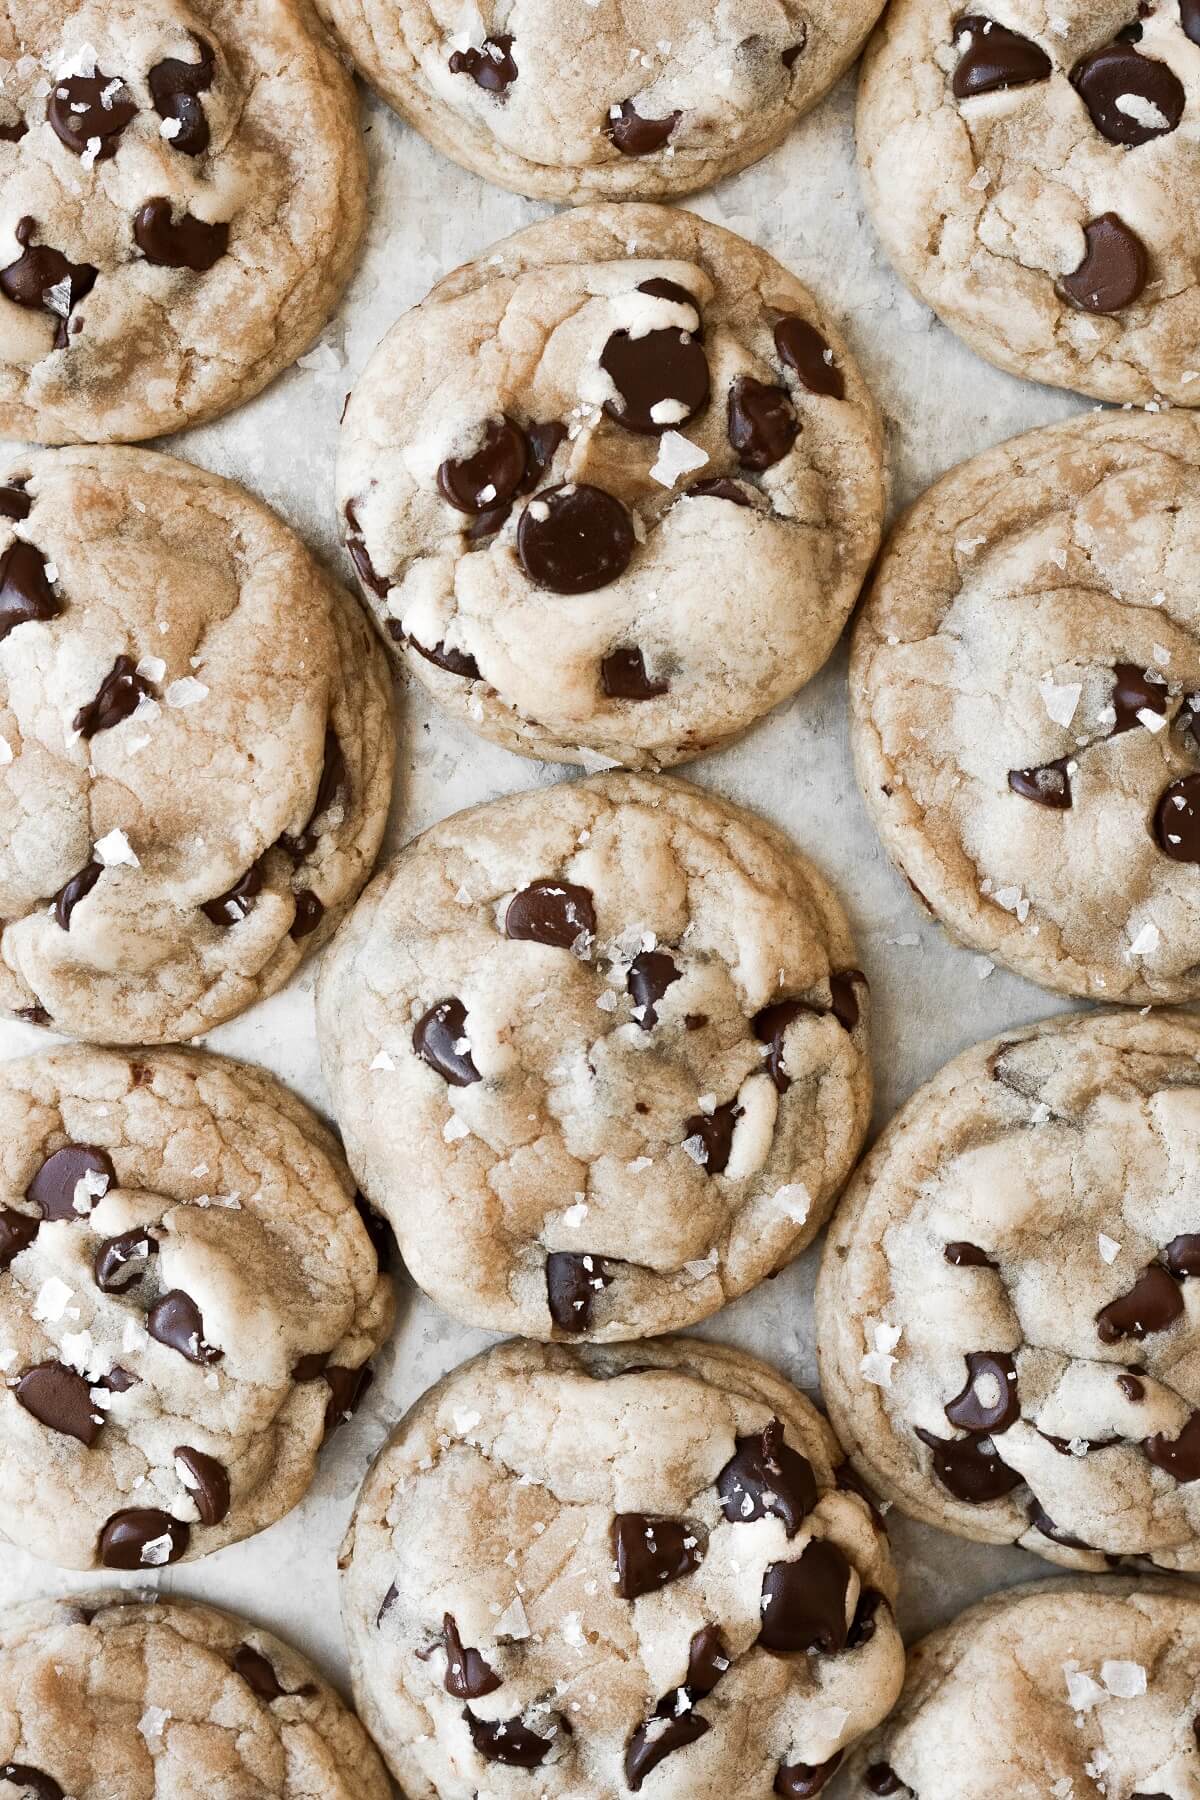 High altitude chocolate chip cookies, arranged on a baking sheet and sprinkled with sea salt.